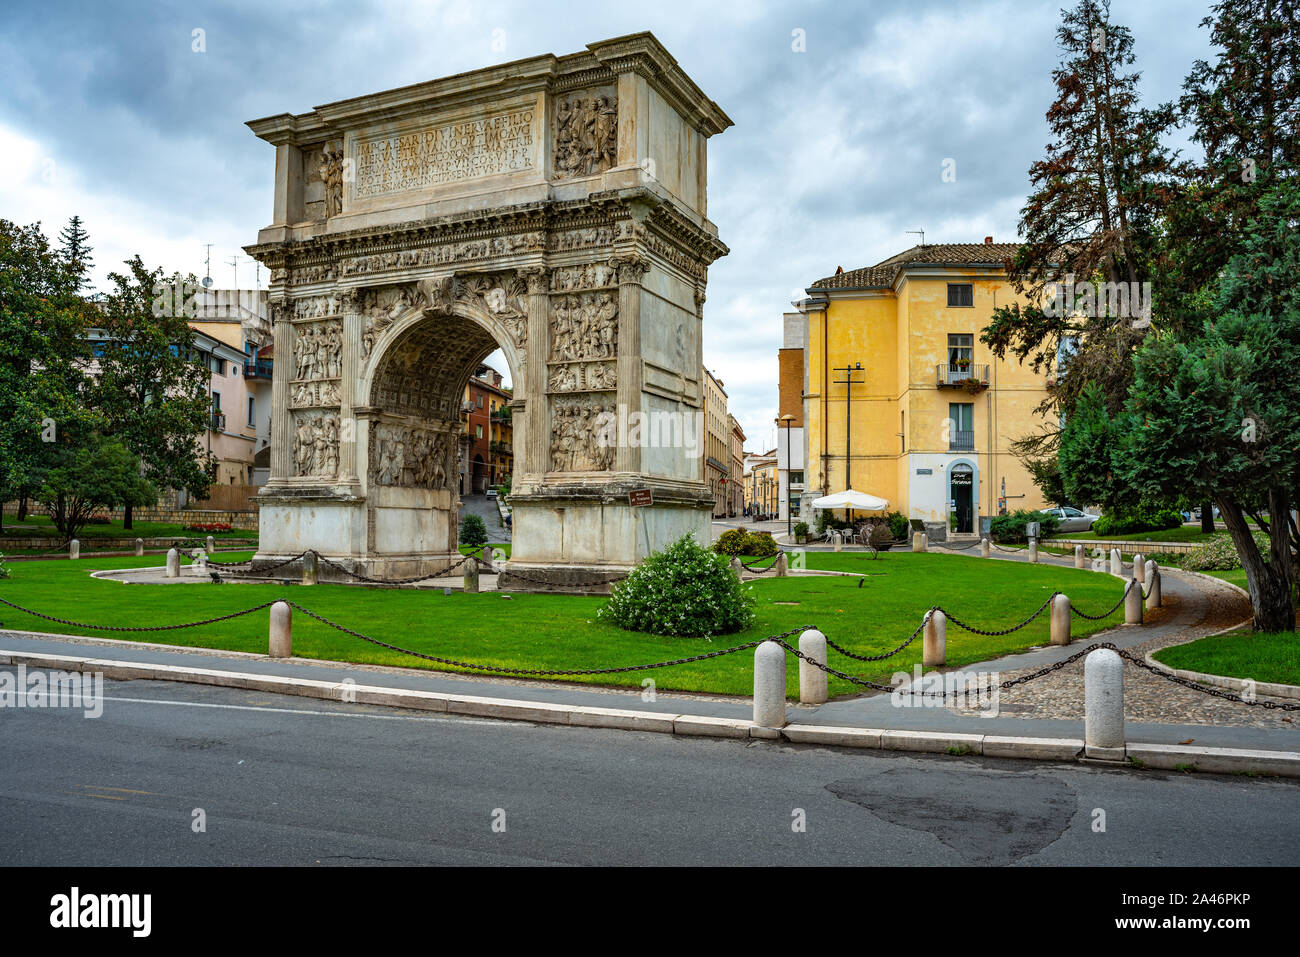 Ancient Roman Arch of Trajan, triumphal arches best preserved.. Benevento, Italy Stock Photo